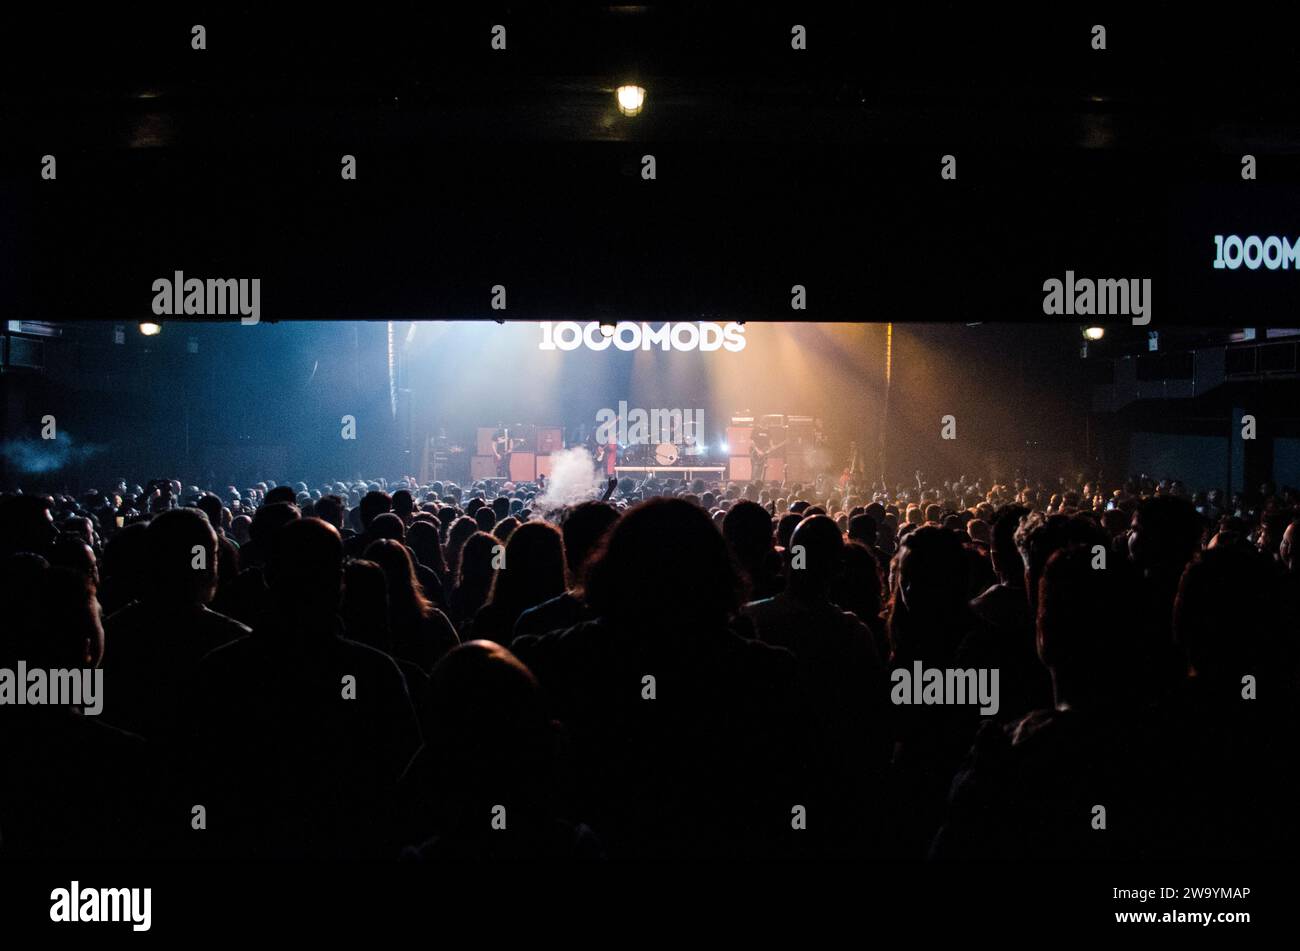 1000mods performing at Floyd Live Music Venue, Athens / Greece, December 2023 Stock Photo